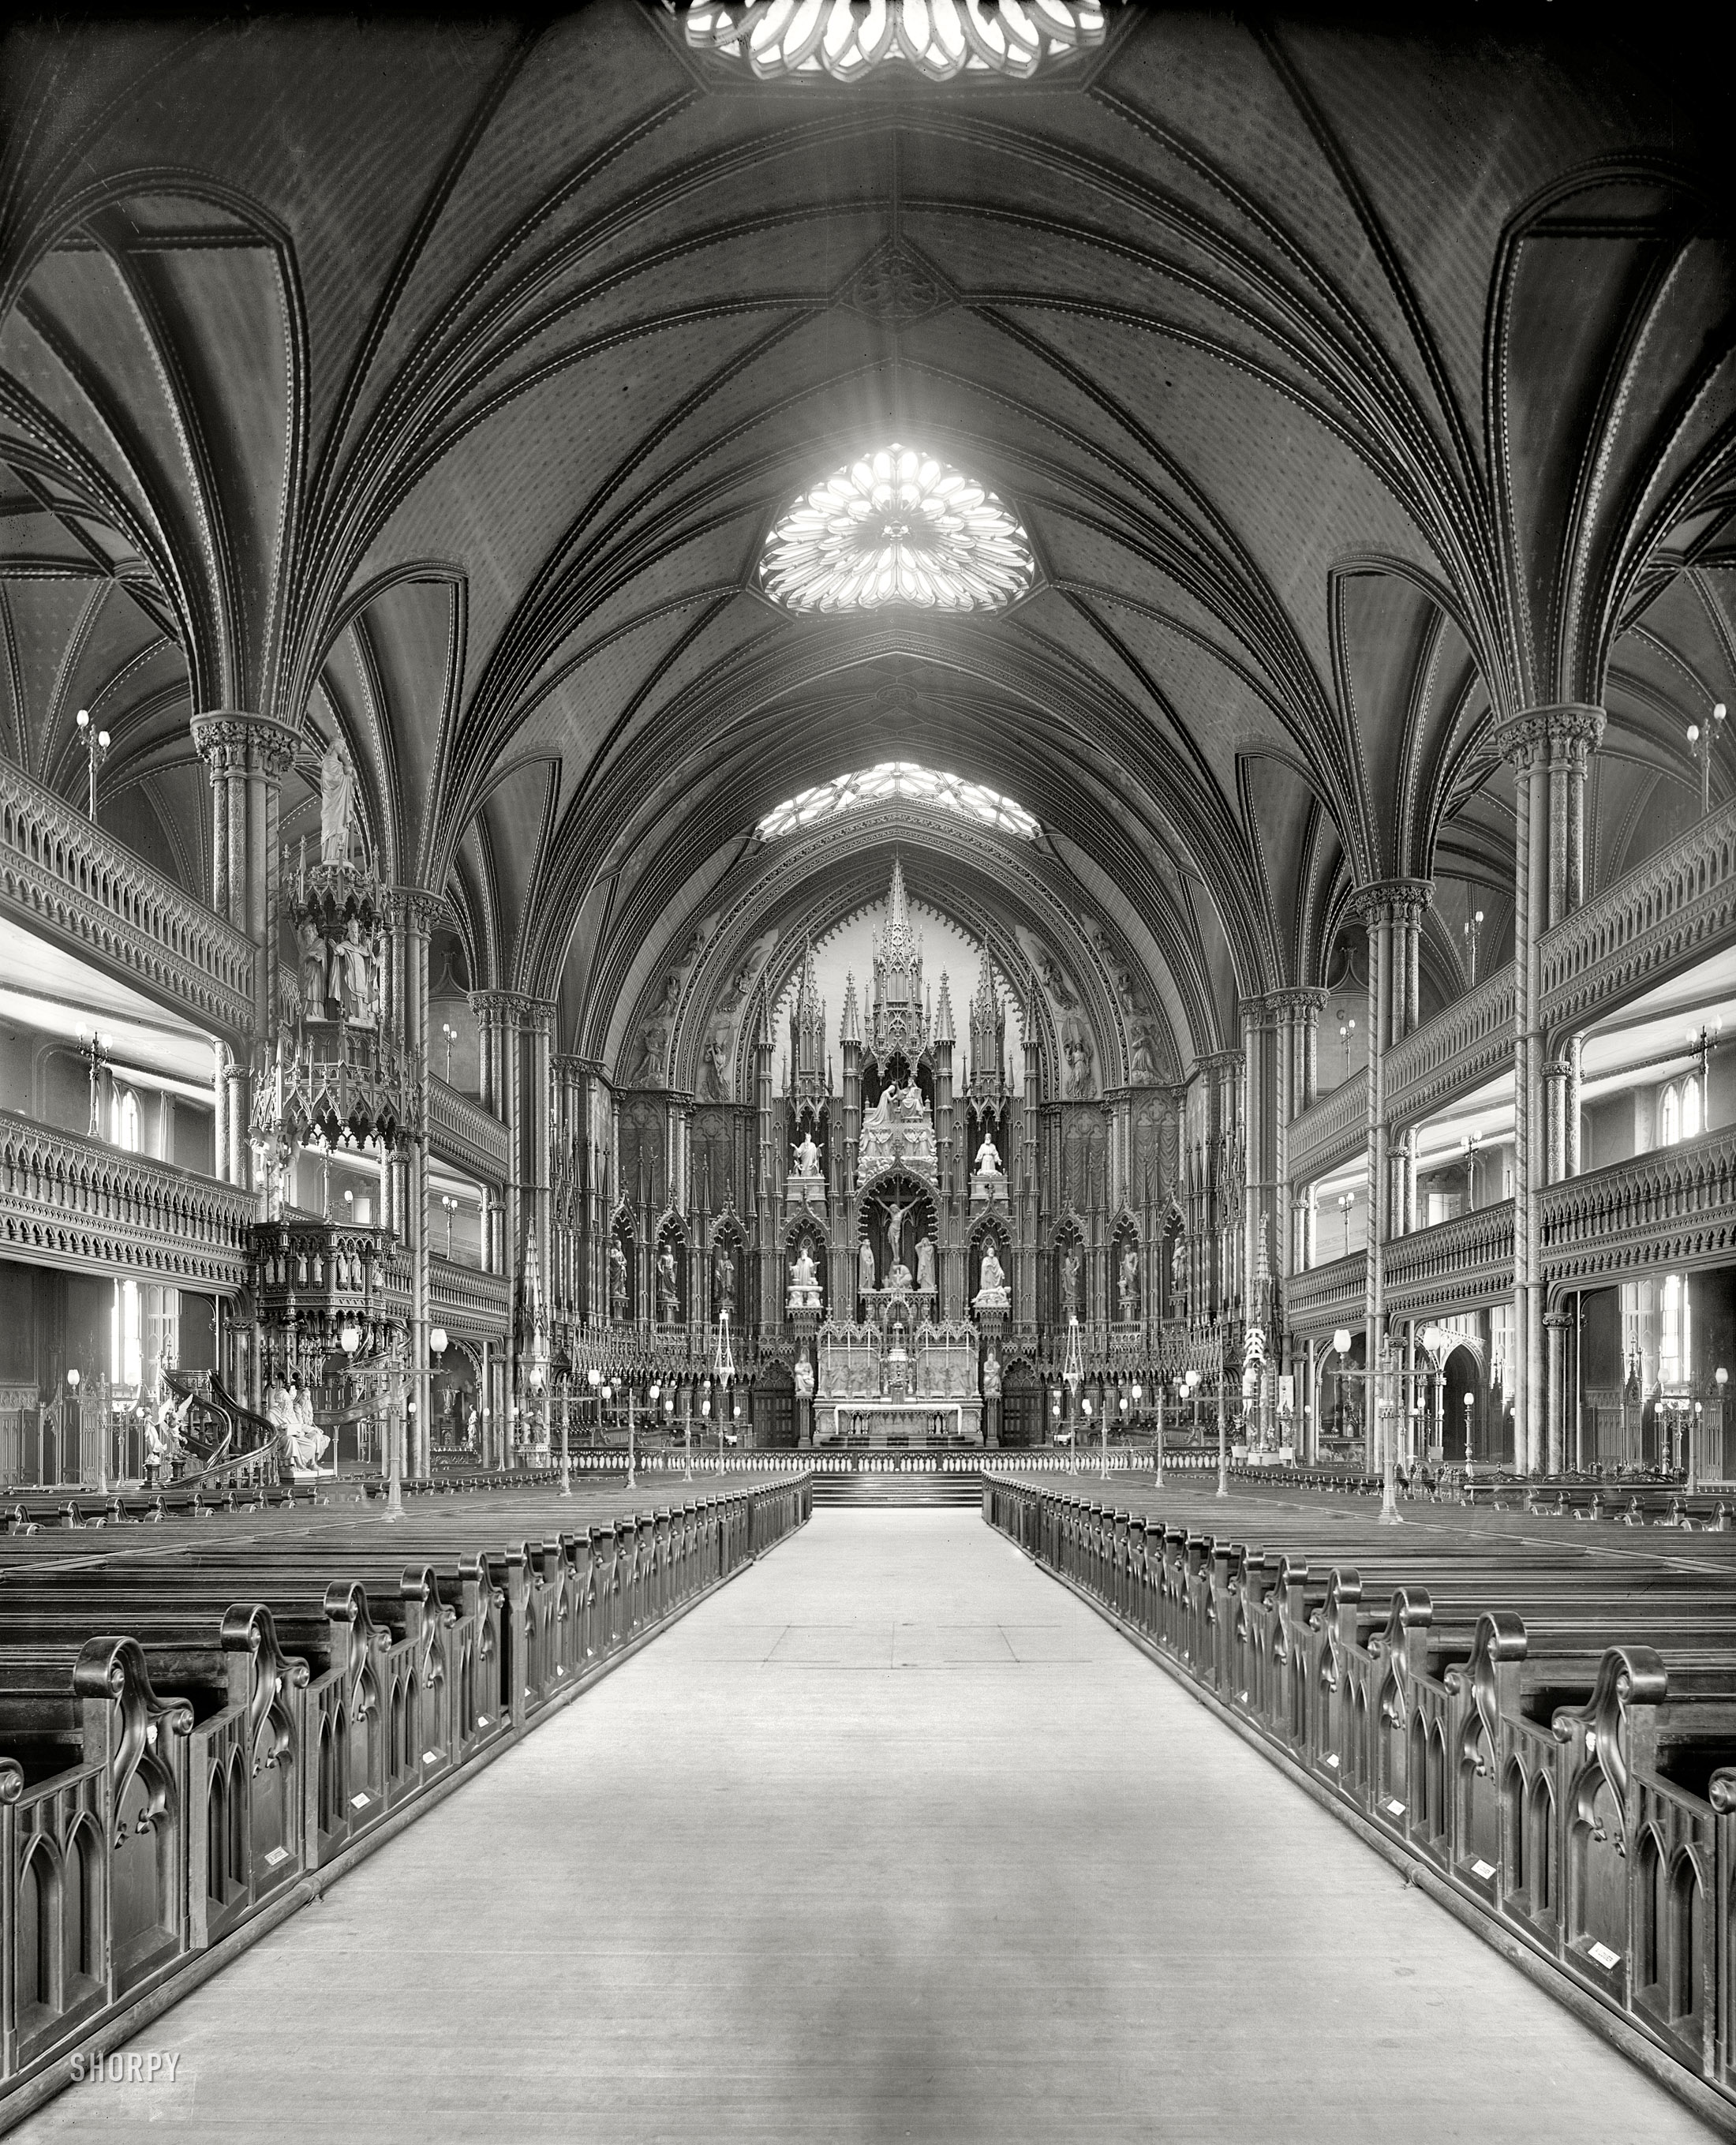 Circa 1900. "Main altar, Church of Notre Dame, Montreal, Quebec." 8x10 inch dry plate glass negative, Detroit Publishing Company. View full size.